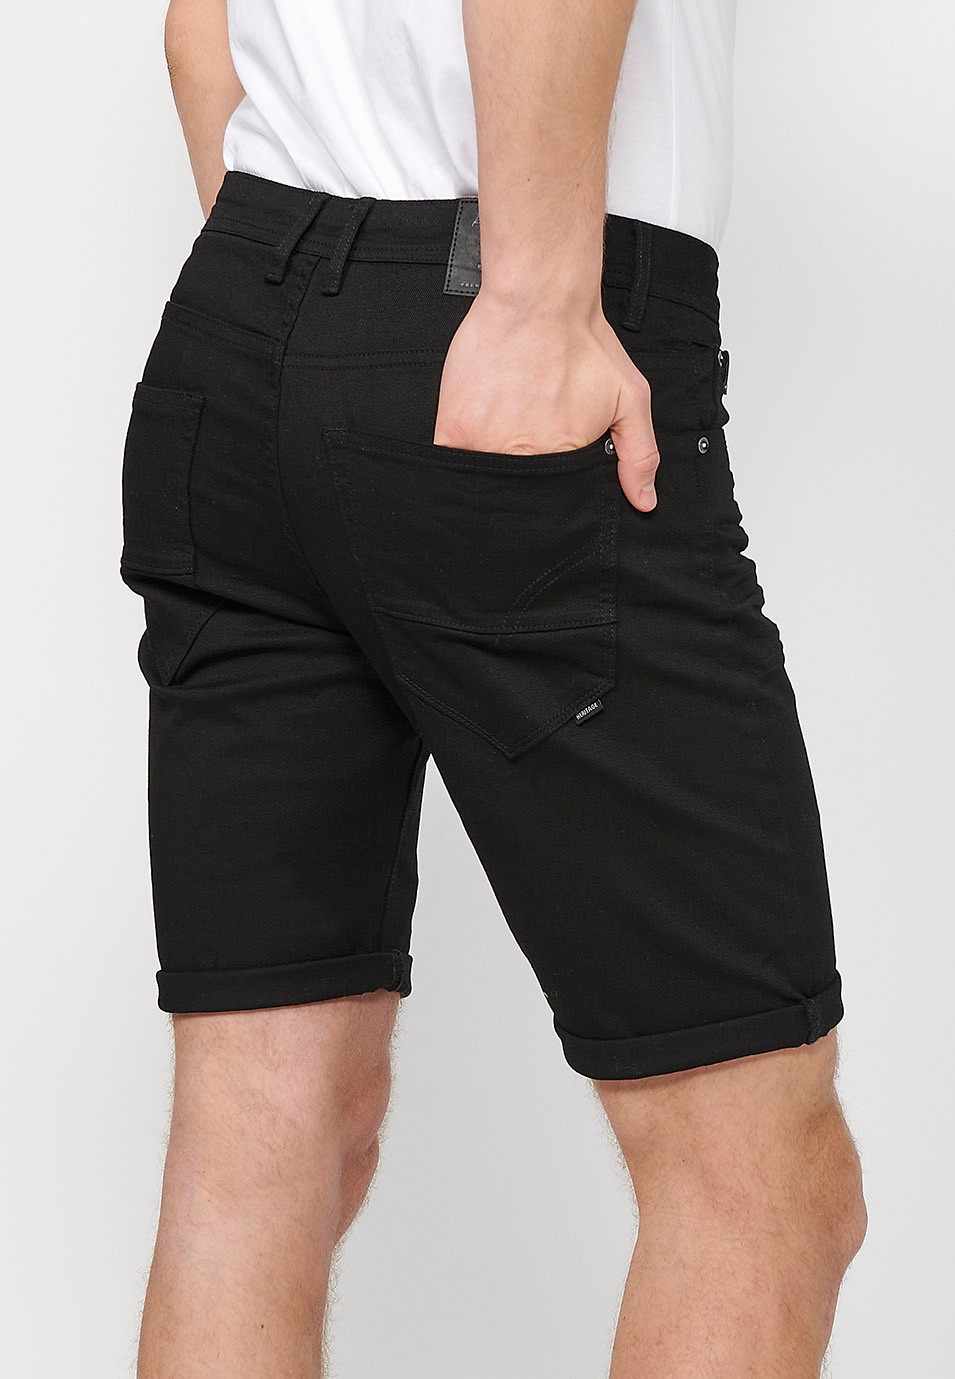 Denim Bermuda shorts with cuffed finish and front zipper and button closure. Five pockets, one black color pocket for men 4